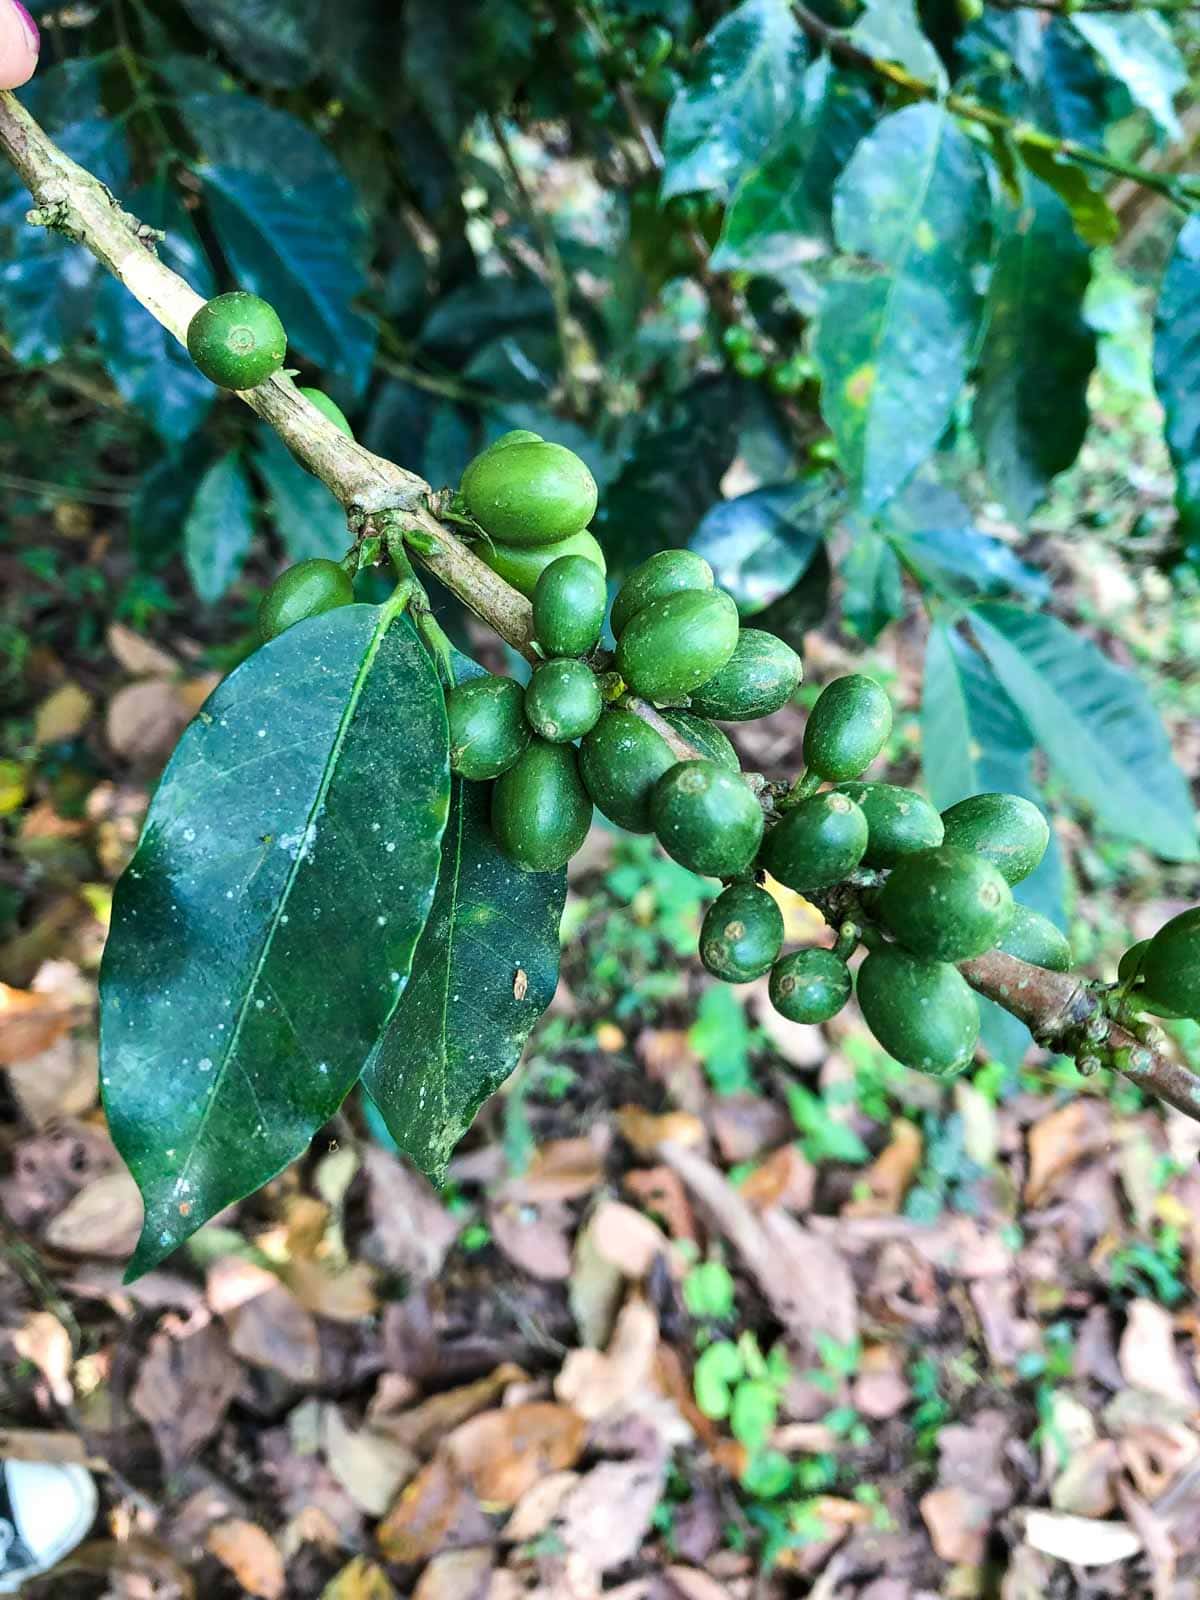 We did a coffee tour during our Medellin tour and saw coffee beans.